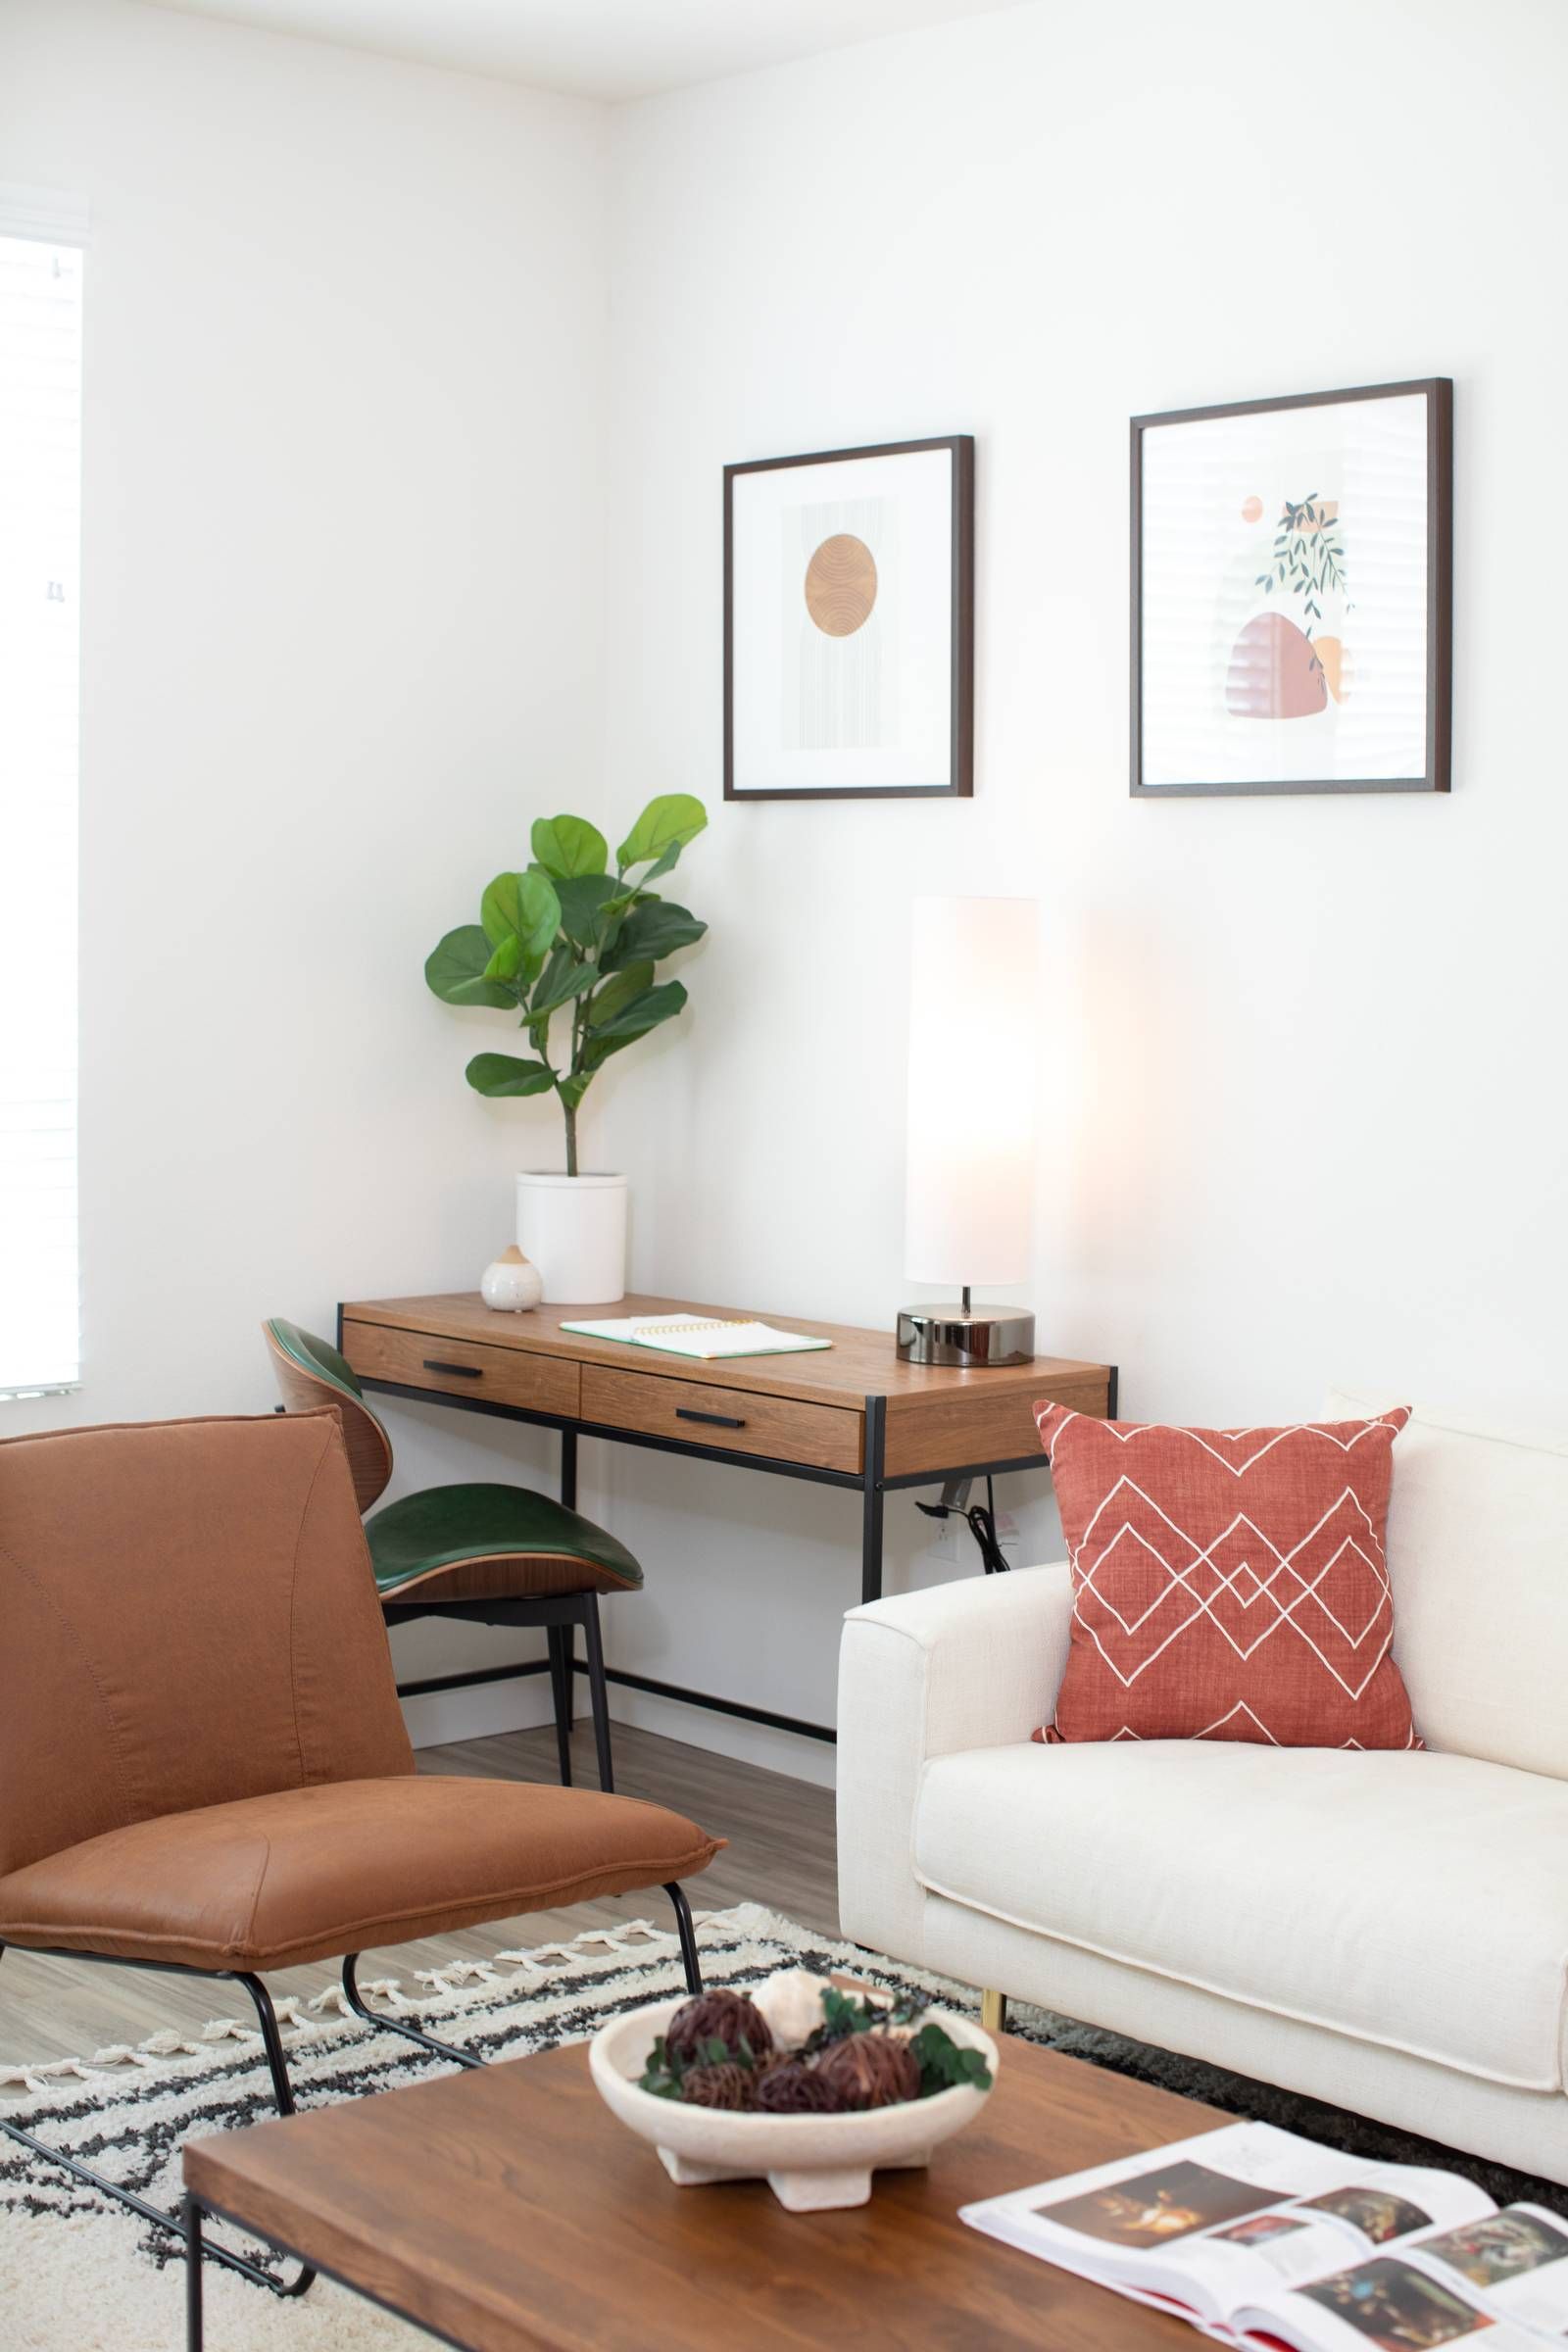 A cozy corner in an Alta Upland apartment, with a plush white sofa, terracotta leather chair, wooden furniture, and framed abstract artwork on the walls.